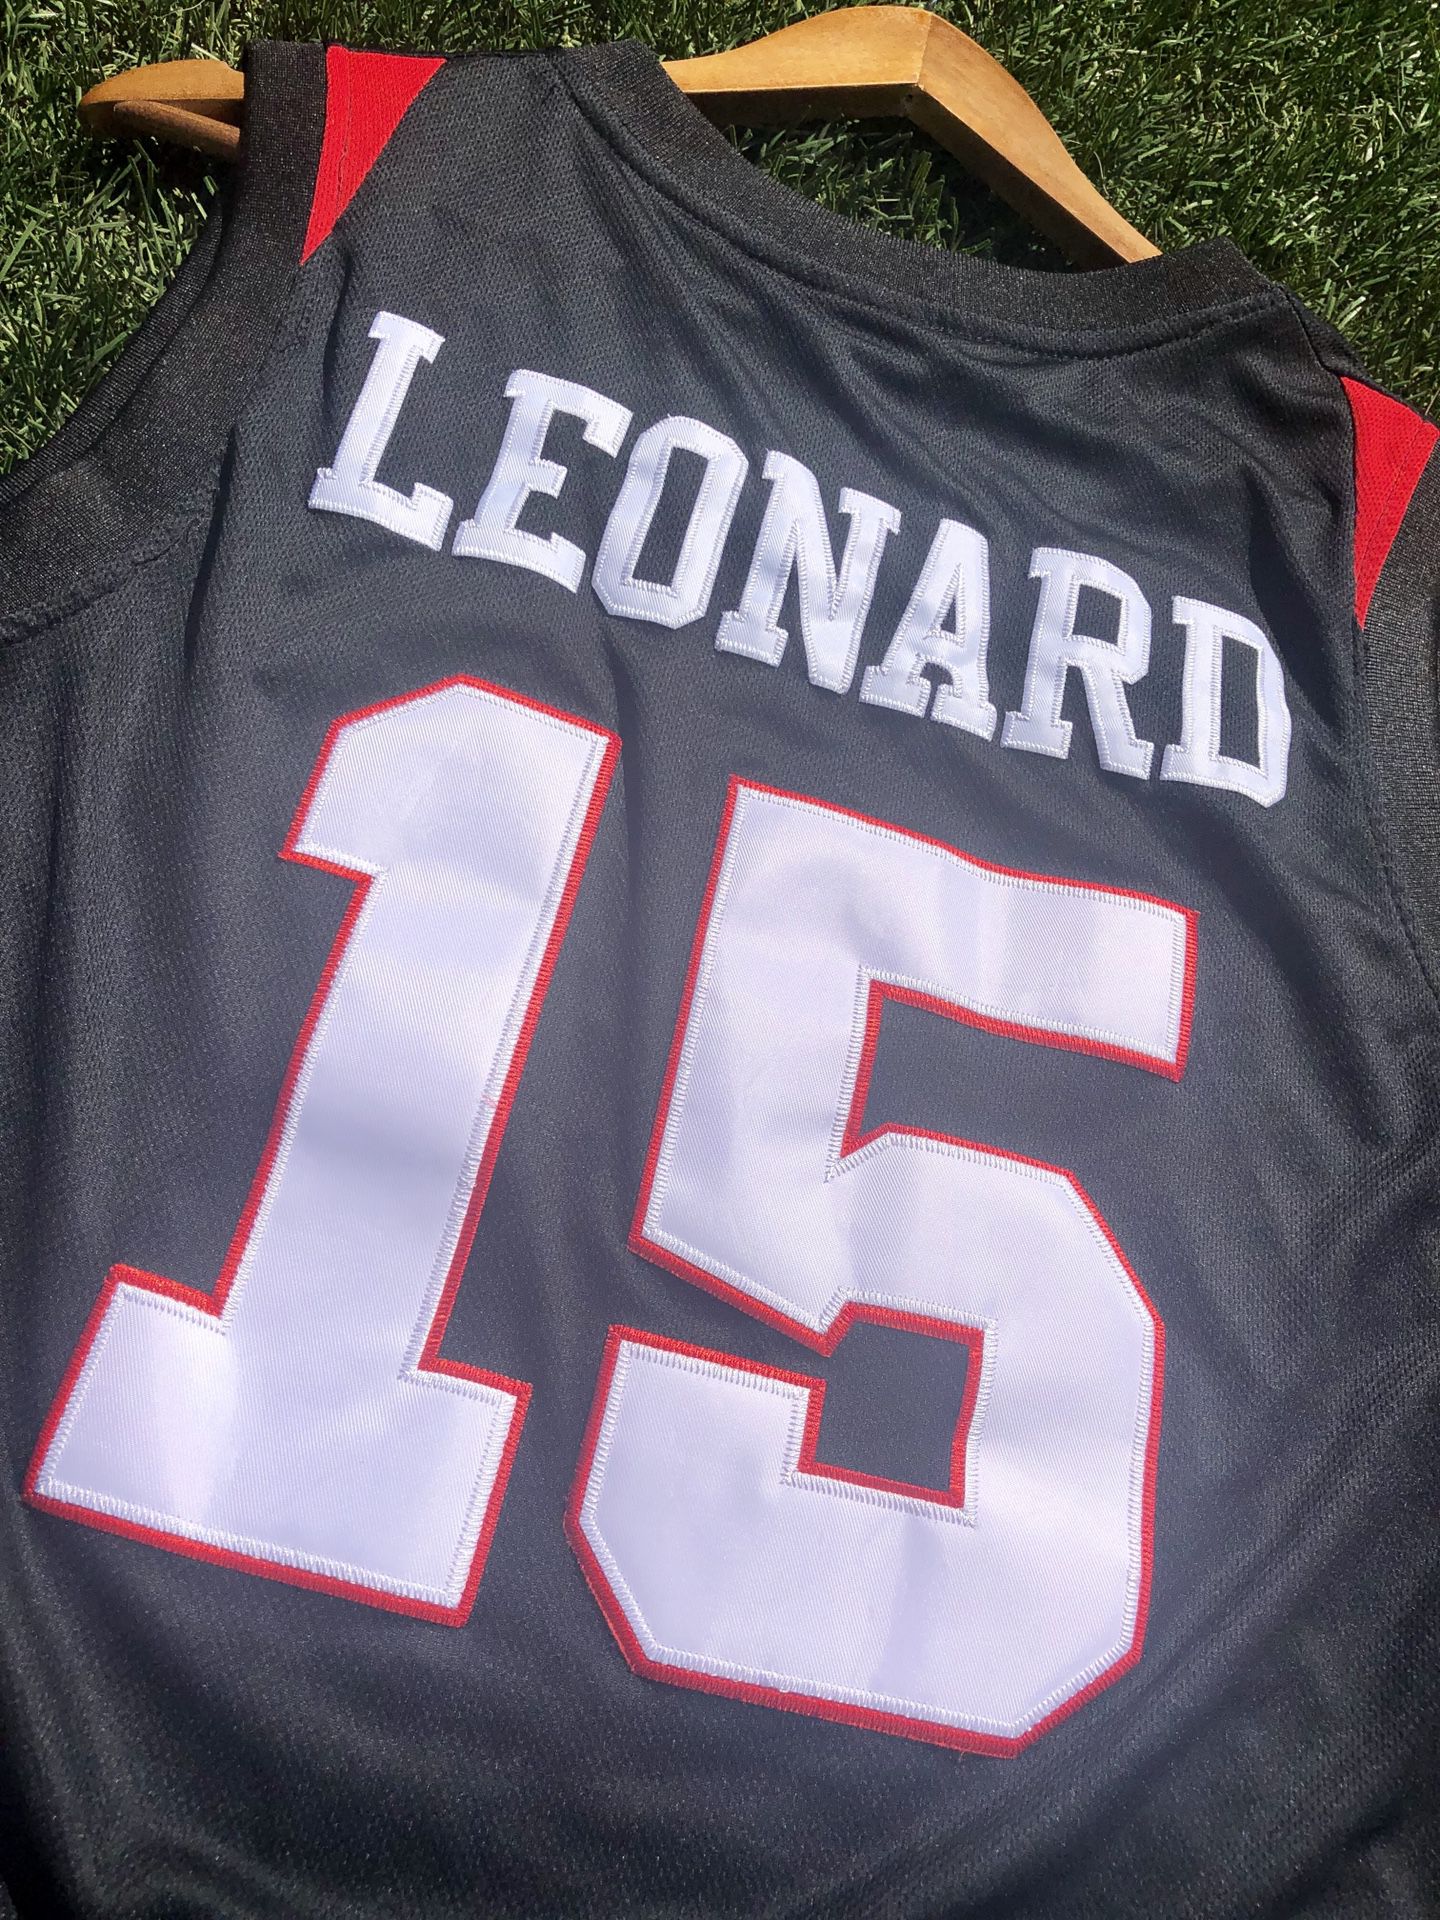 SDSU Bookstore on X: ⚫️ NEW ⚫️ Black Kawhi Leonard Jerseys are available  in the #SDSUBookstore! 🏀 We have a LIMITED amount, so hurry and grab yours  for tonight's game against Fresno